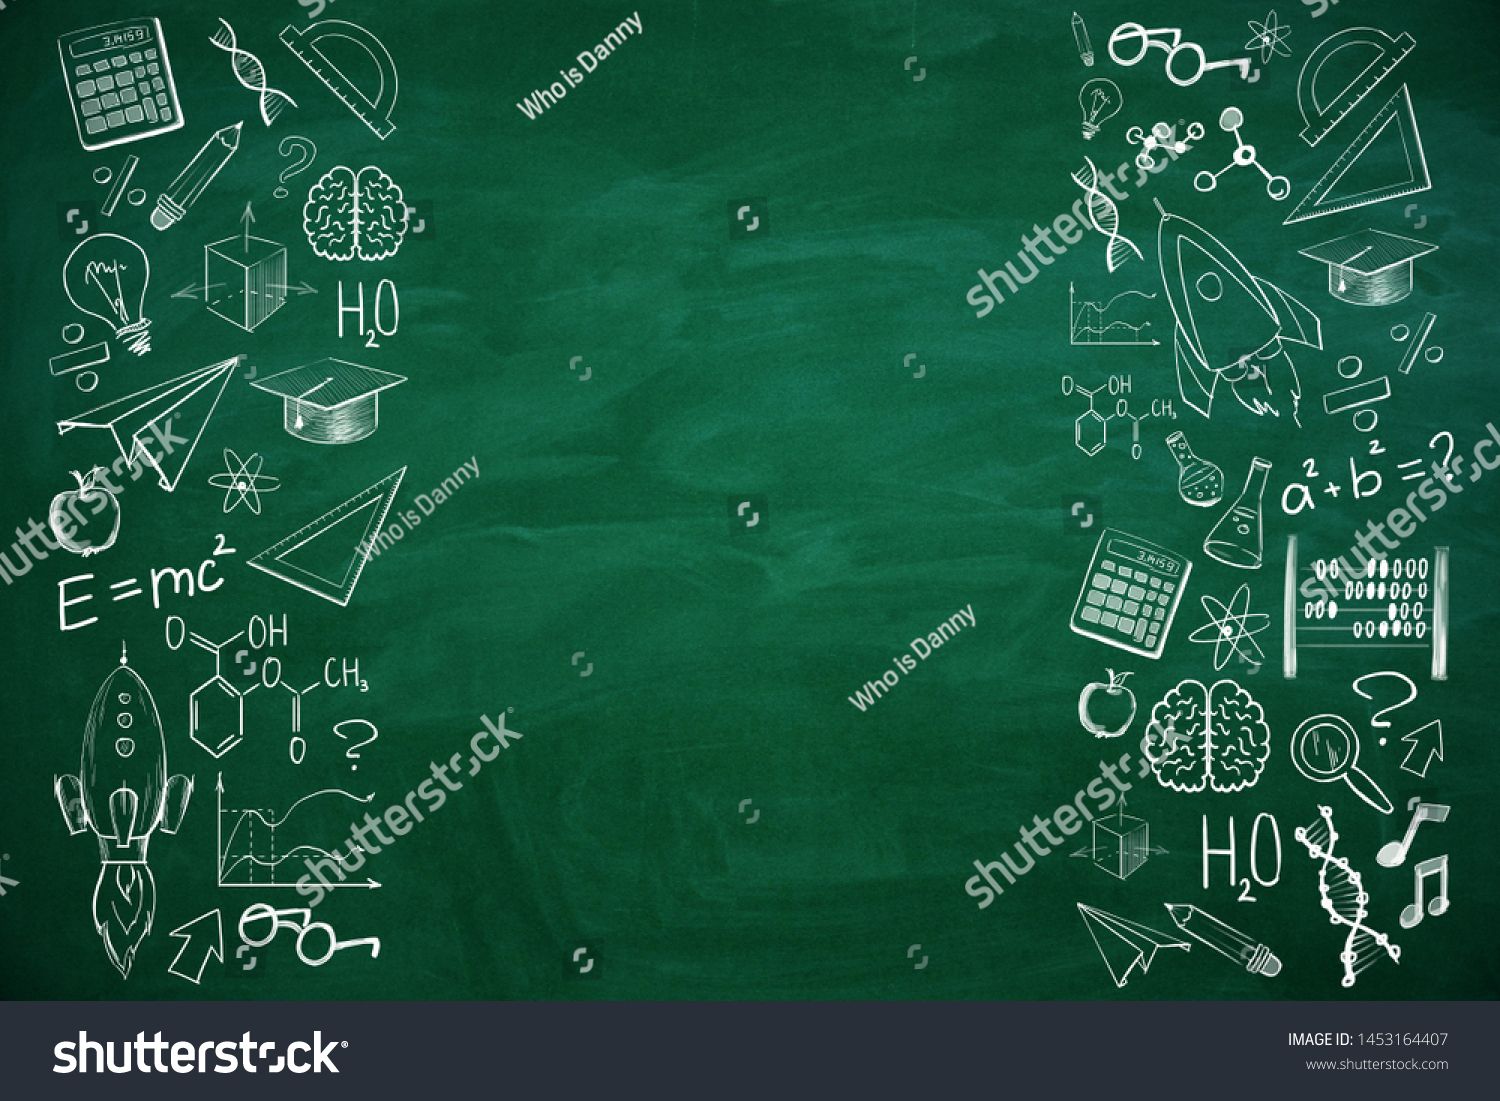 Creative Educational Sketch On Chalkboard Background With Copy